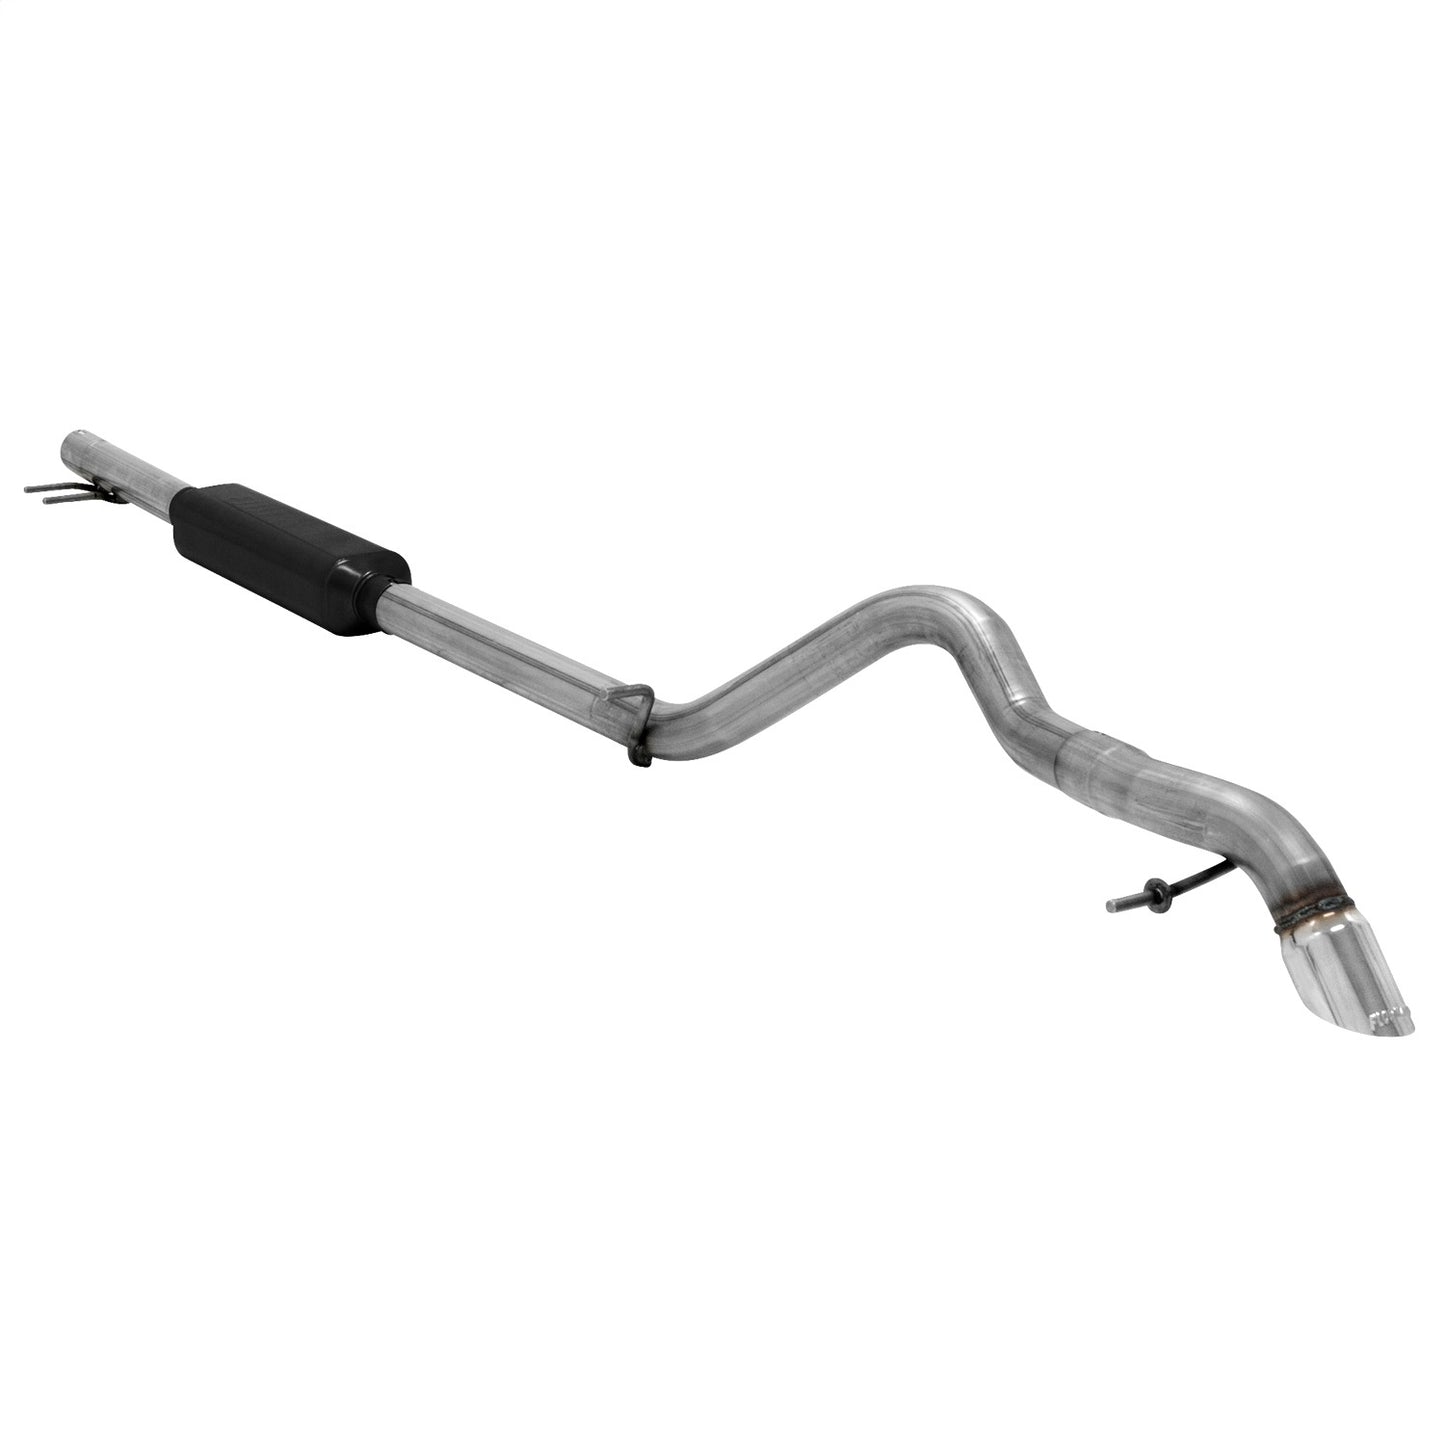 Flowmaster 817674 American Thunder Cat Back Exhaust System